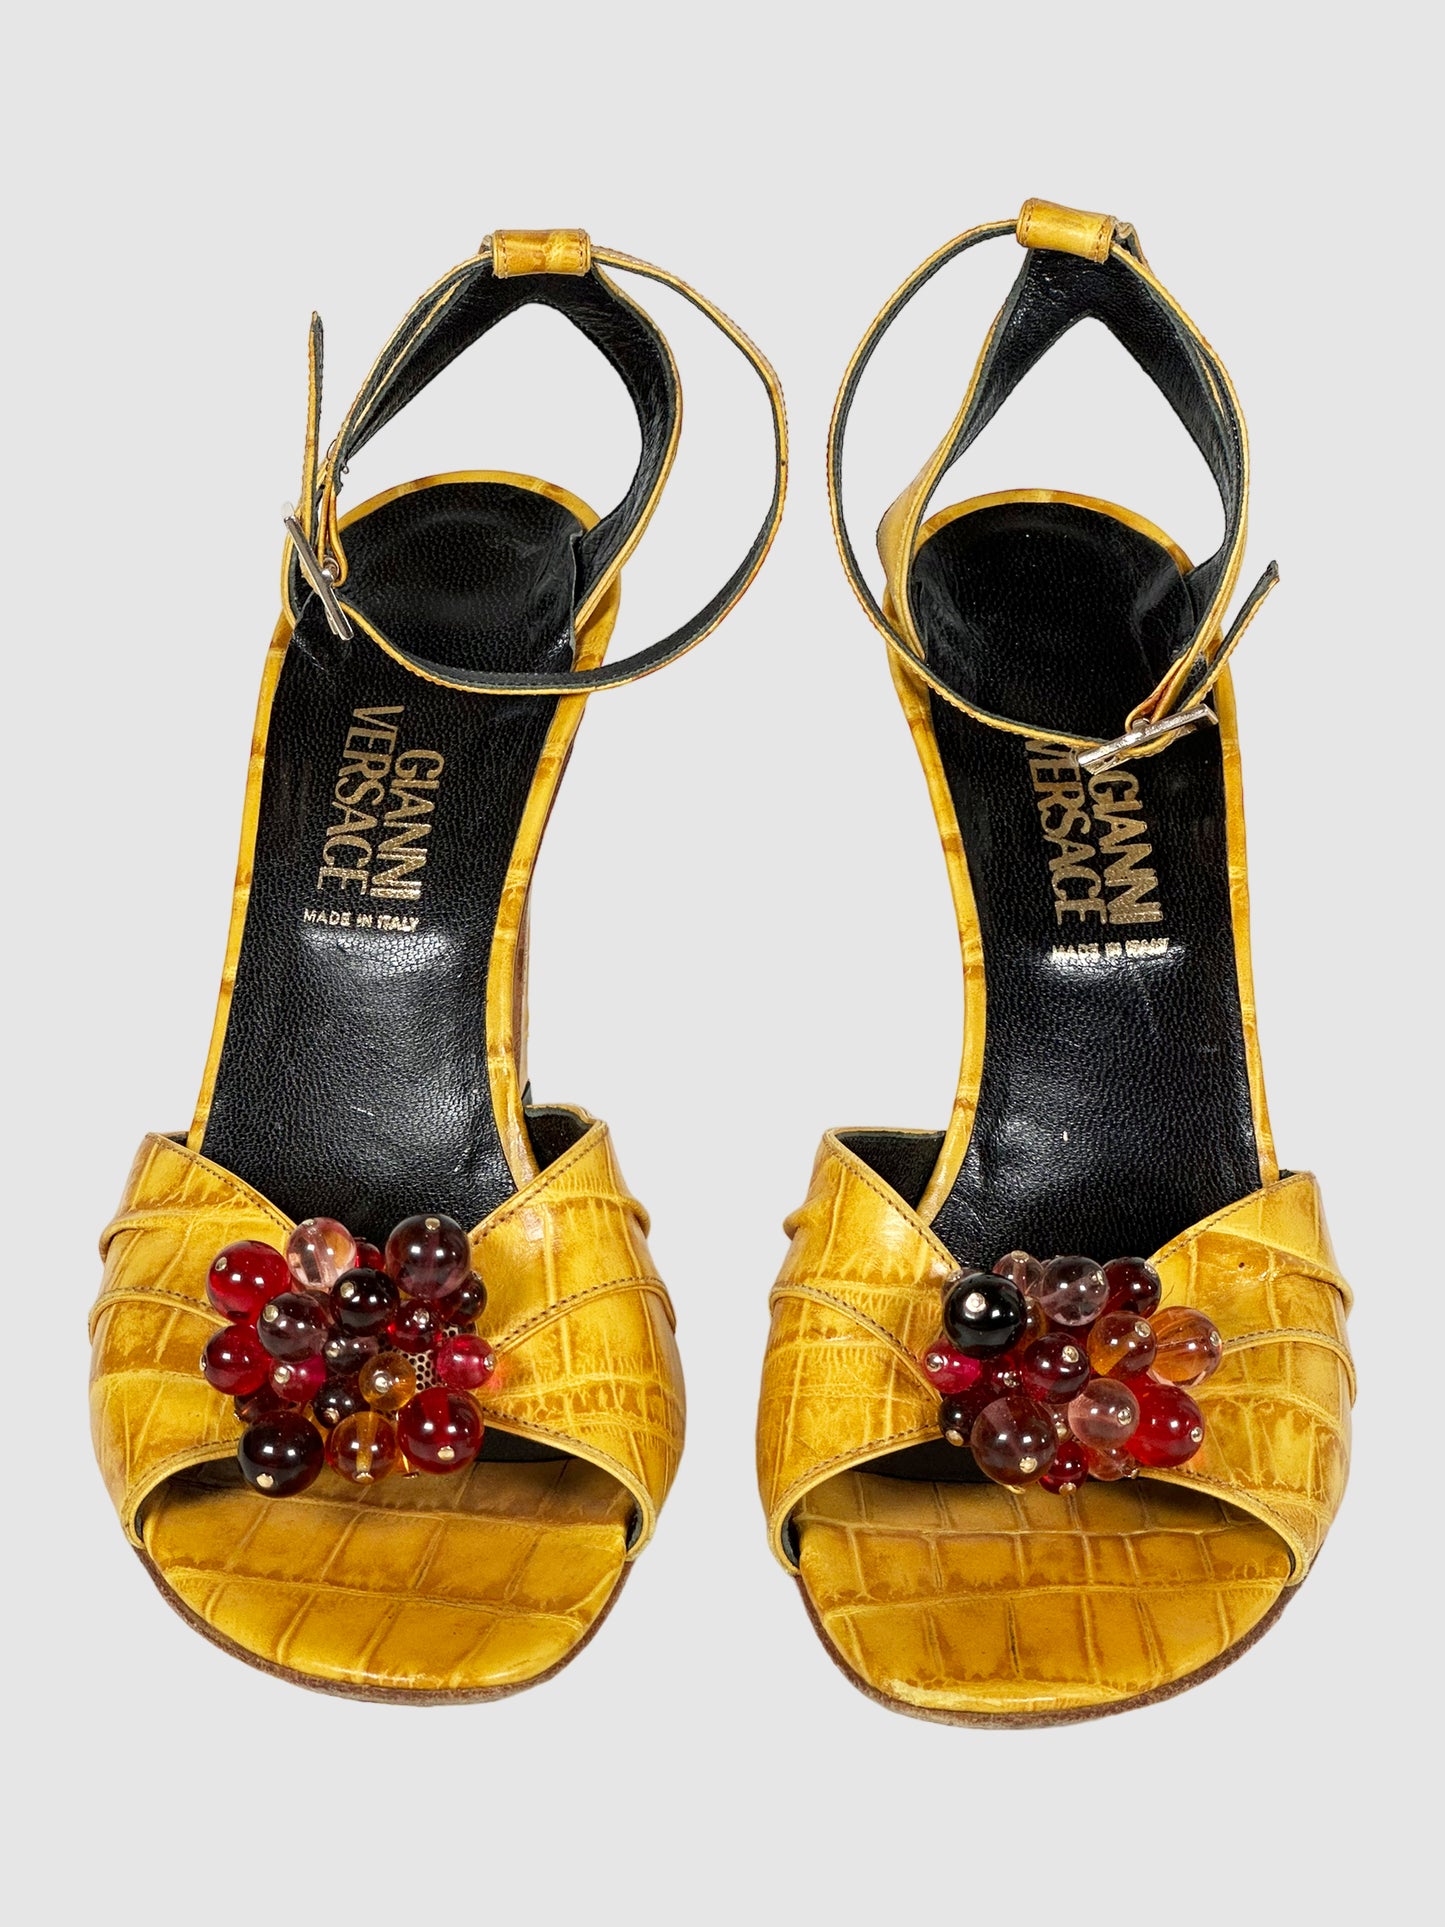 Gianni Versace Embossed Leather Sandals - Size 38